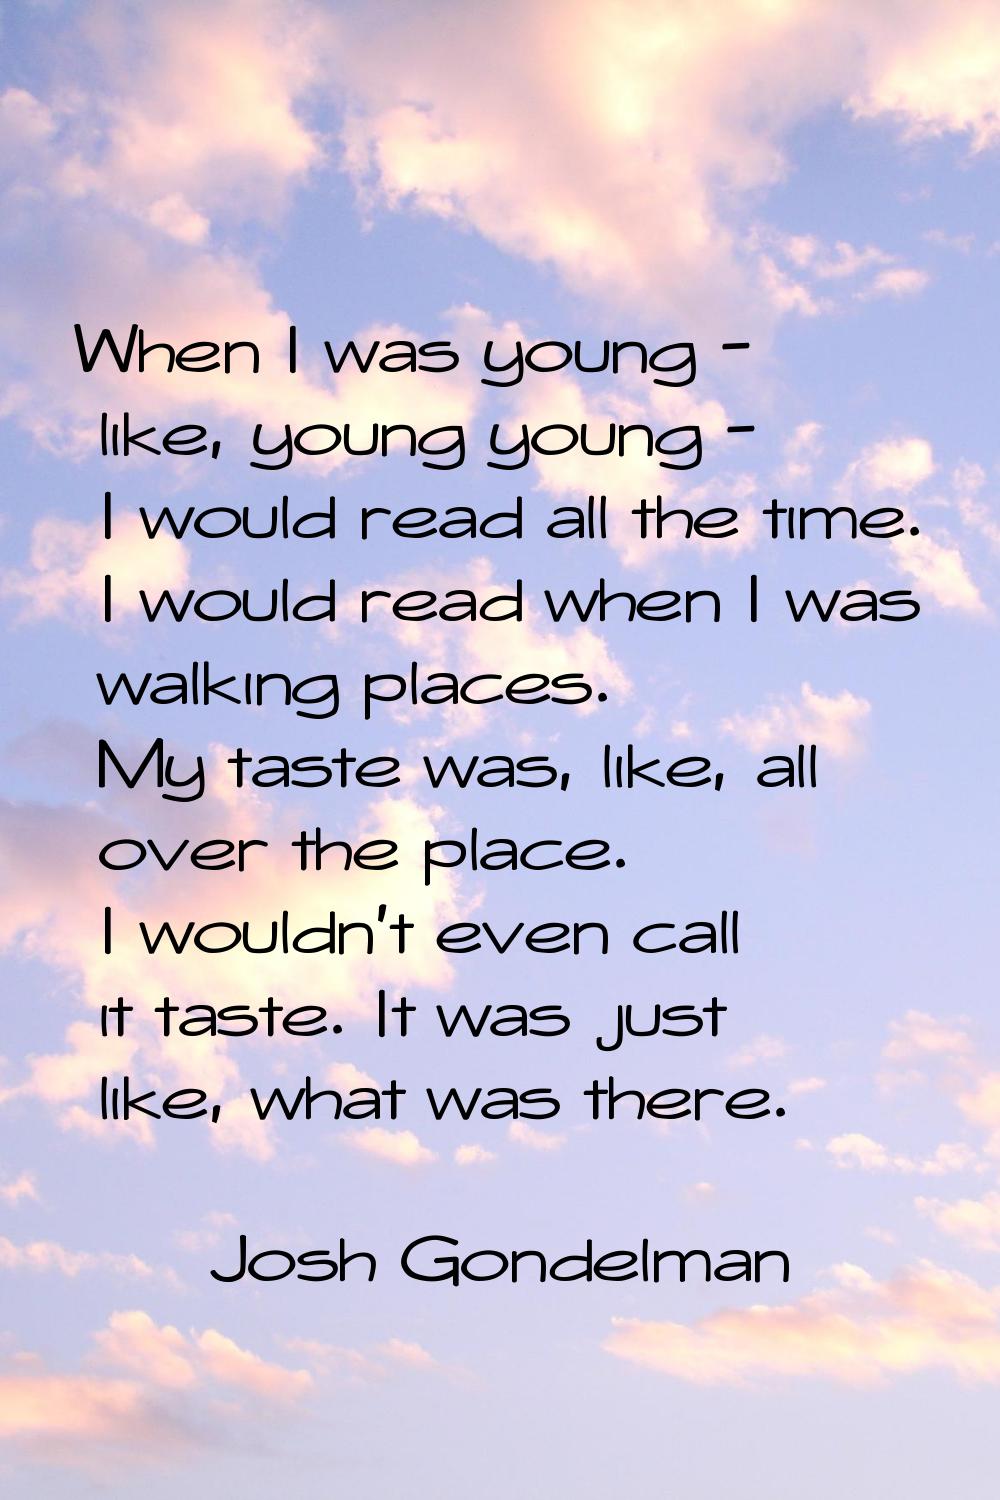 When I was young - like, young young - I would read all the time. I would read when I was walking p